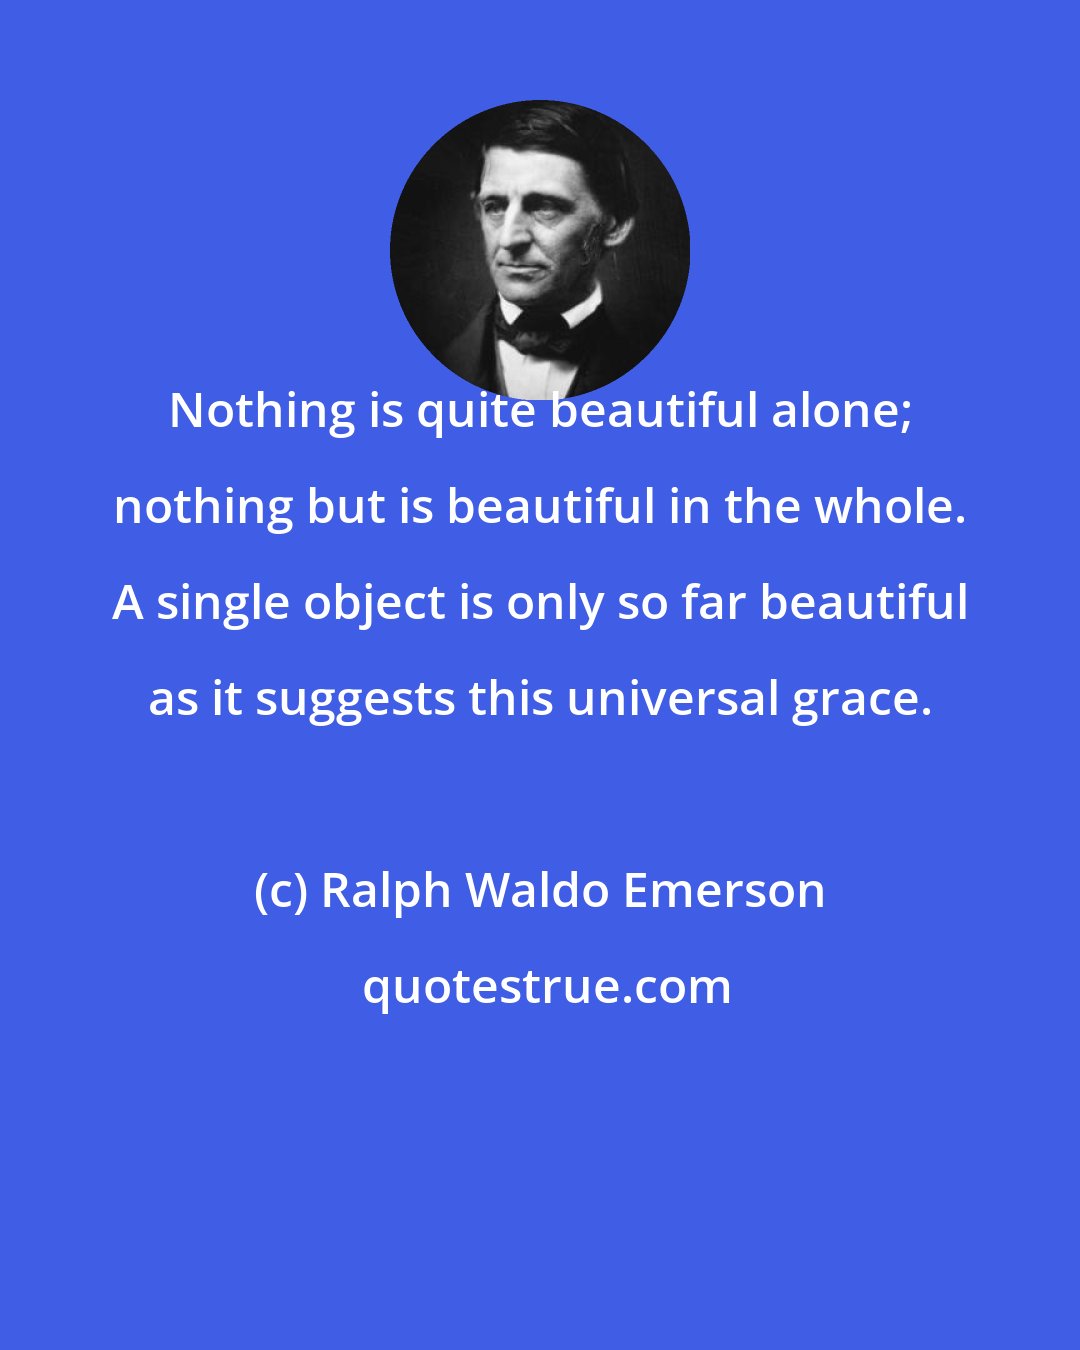 Ralph Waldo Emerson: Nothing is quite beautiful alone; nothing but is beautiful in the whole. A single object is only so far beautiful as it suggests this universal grace.